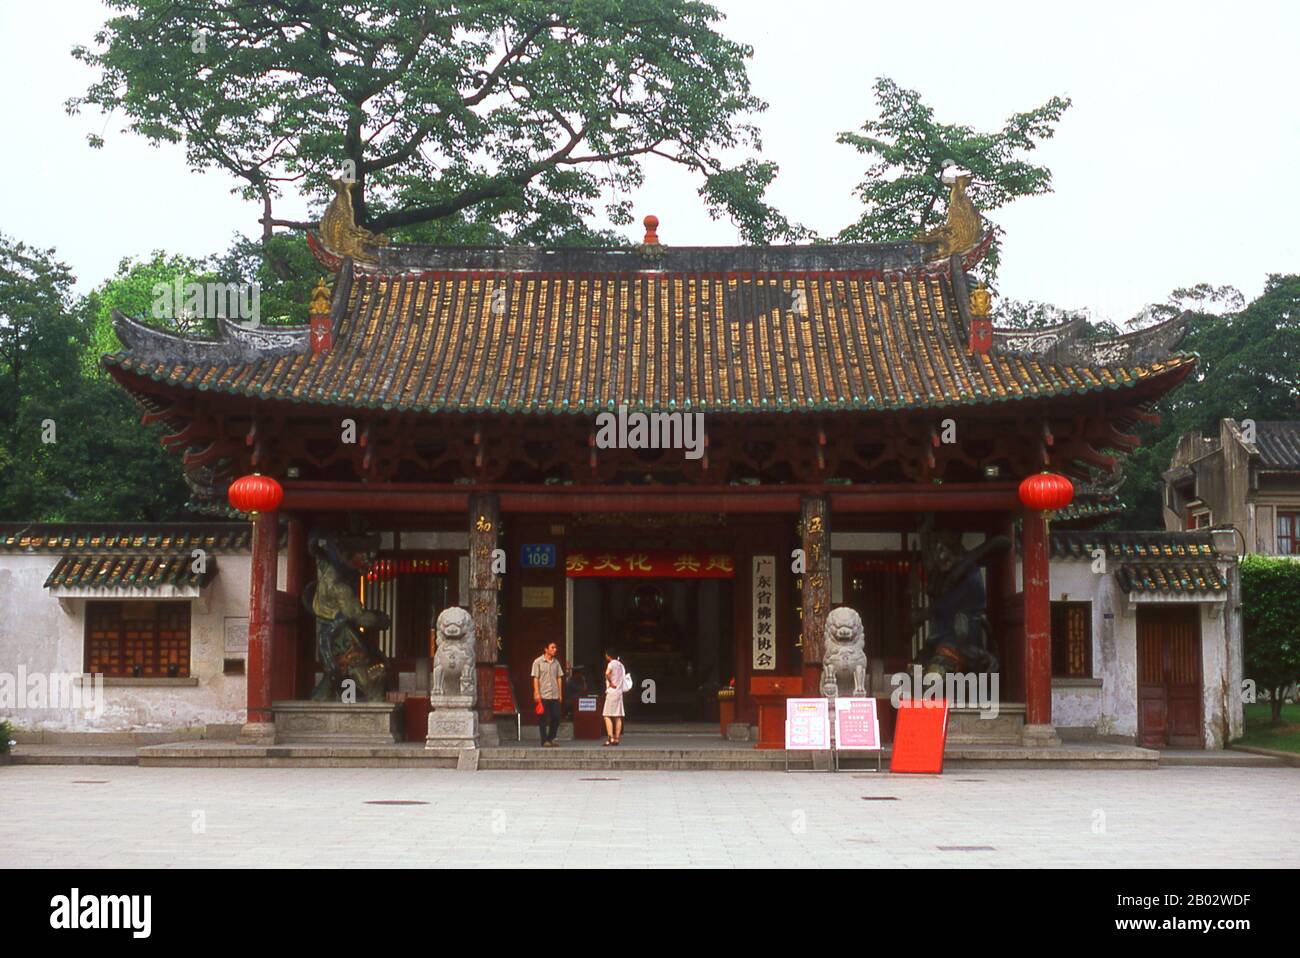 This Zen, or Chan, Buddhist temple, is the oldest in Guangzhou, dating back to the Eastern Jin dynasty (265 - 420 CE). It was originally built around 400 CE by an Indian monk. Hui Neng, the Sixth Patriarch of Zen Buddhism, served as a novice monk here in the 600s.  Most of the present structures date back to 1832, the time of the last big renovation. The Great Hall, with its impressive pillars, is still architecturally interesting. There are two pagodas behind the hall: the stone Jingfa Pagoda built in 676 on top of a hair of Hui Neng, and the Song-dynasty Eastern Iron Pagoda, made of gilt iro Stock Photo